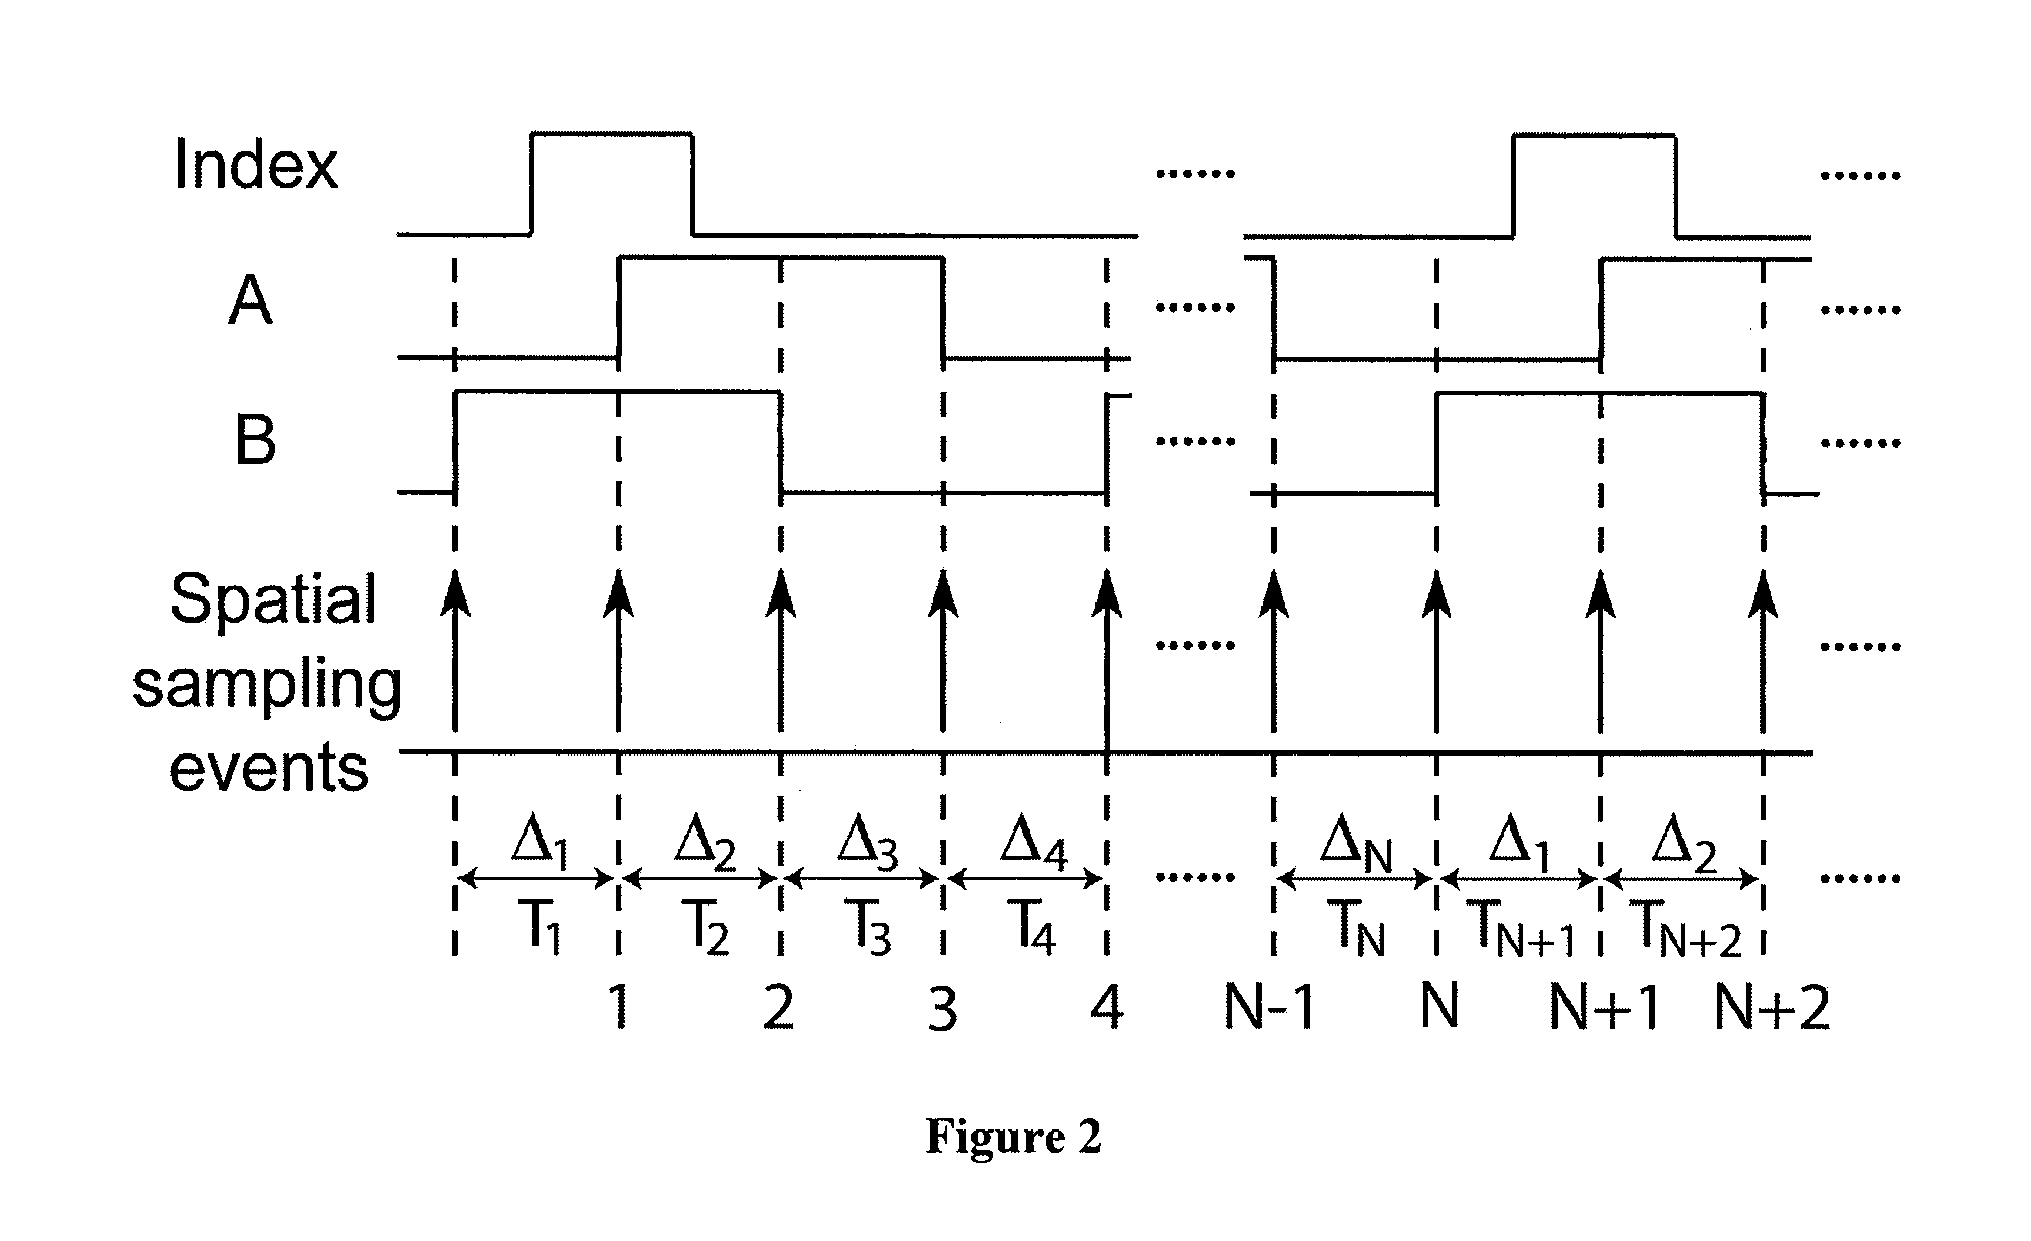 Self-calibration method and apparatus for on-axis rotary encoders